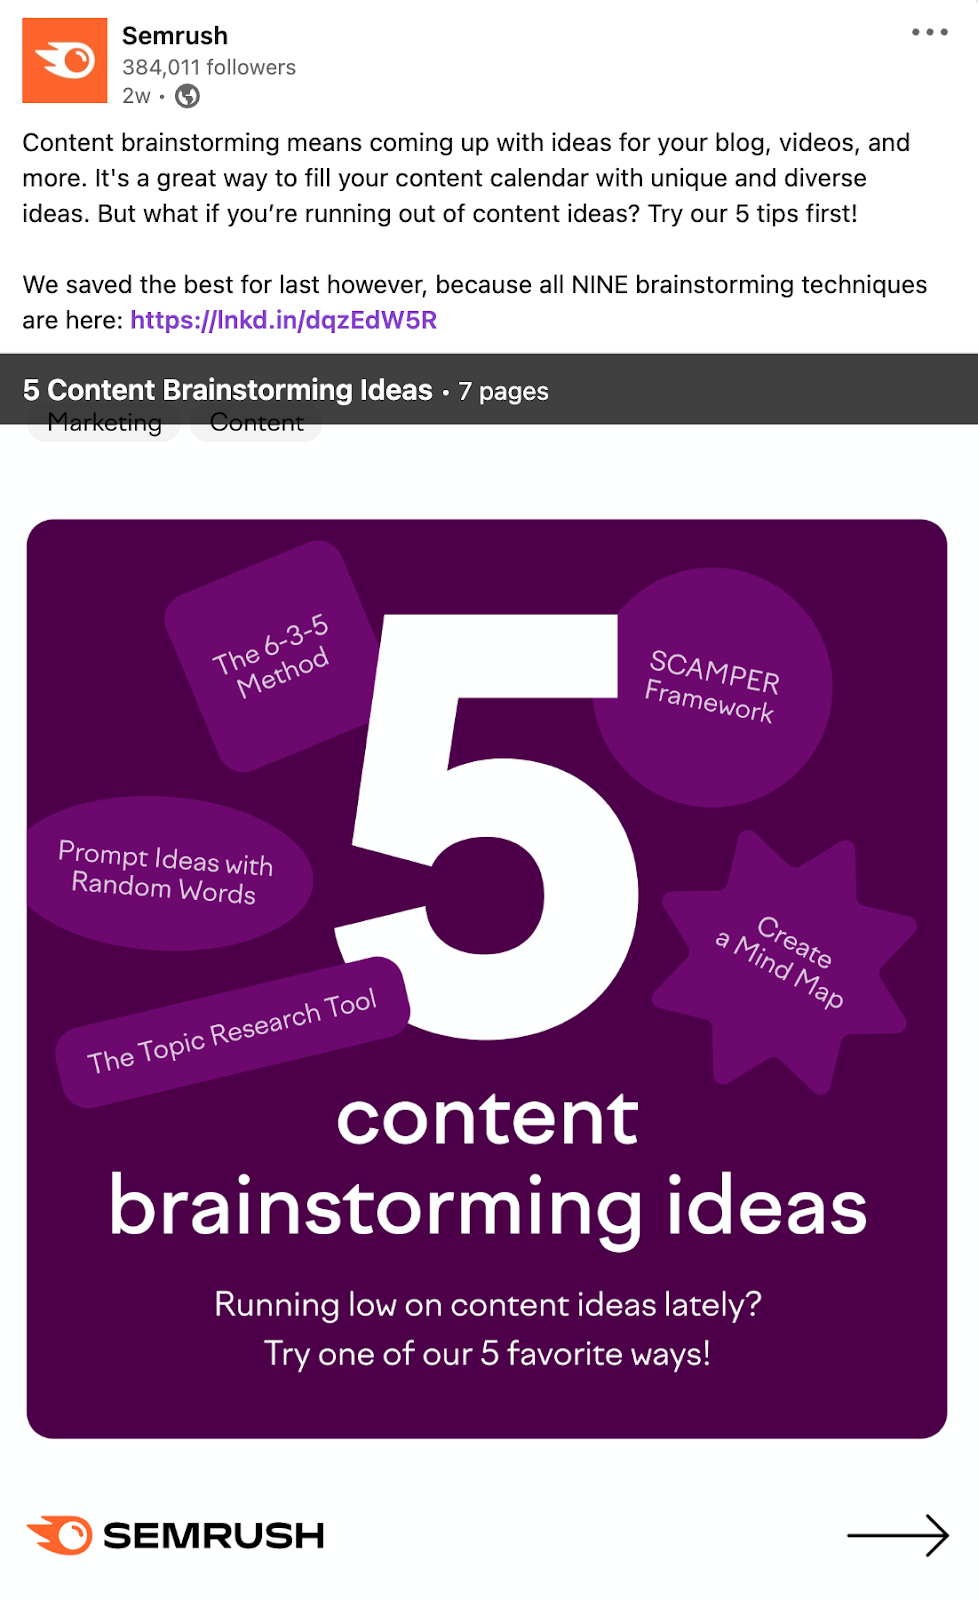 Semrush's post on LinkedIn sharing an article on content brainstorming